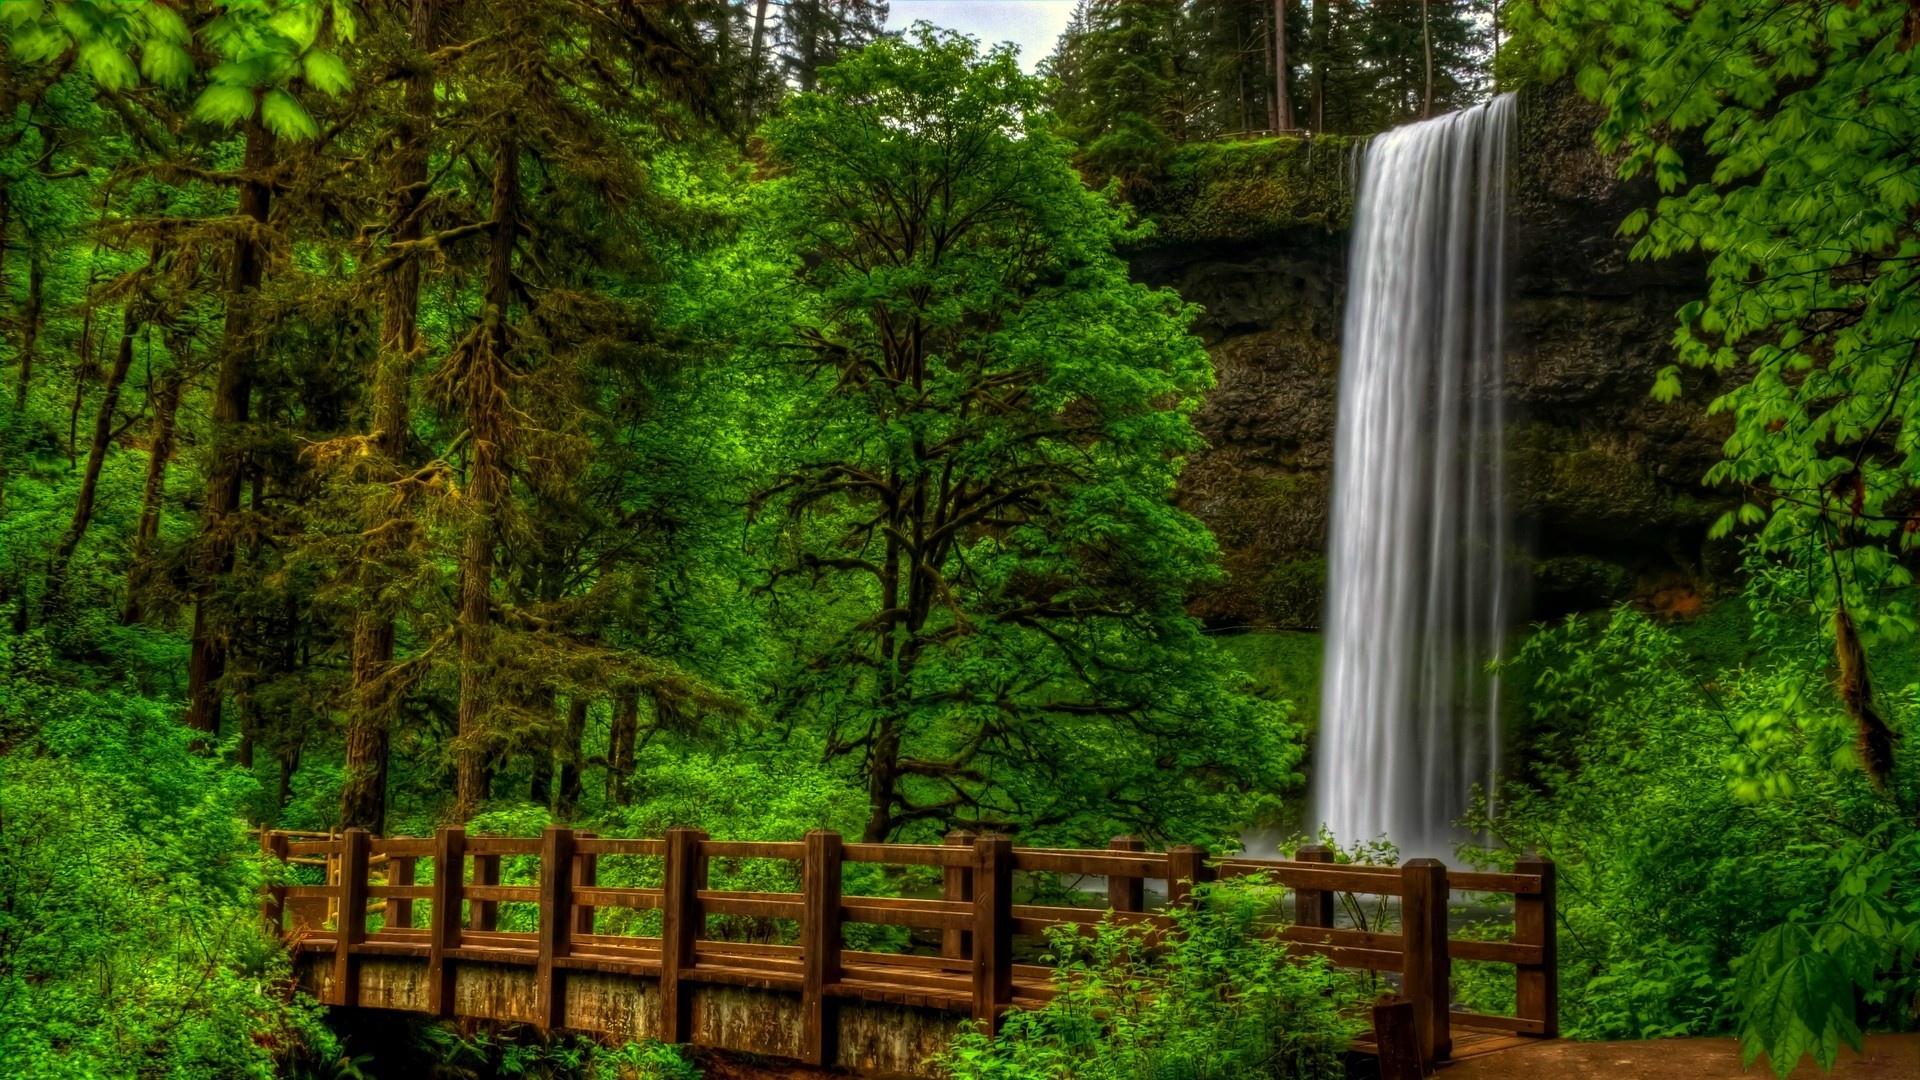 Waterfall in forest, Nature's cascade, Natural wonder, Refreshing oasis, 1920x1080 Full HD Desktop